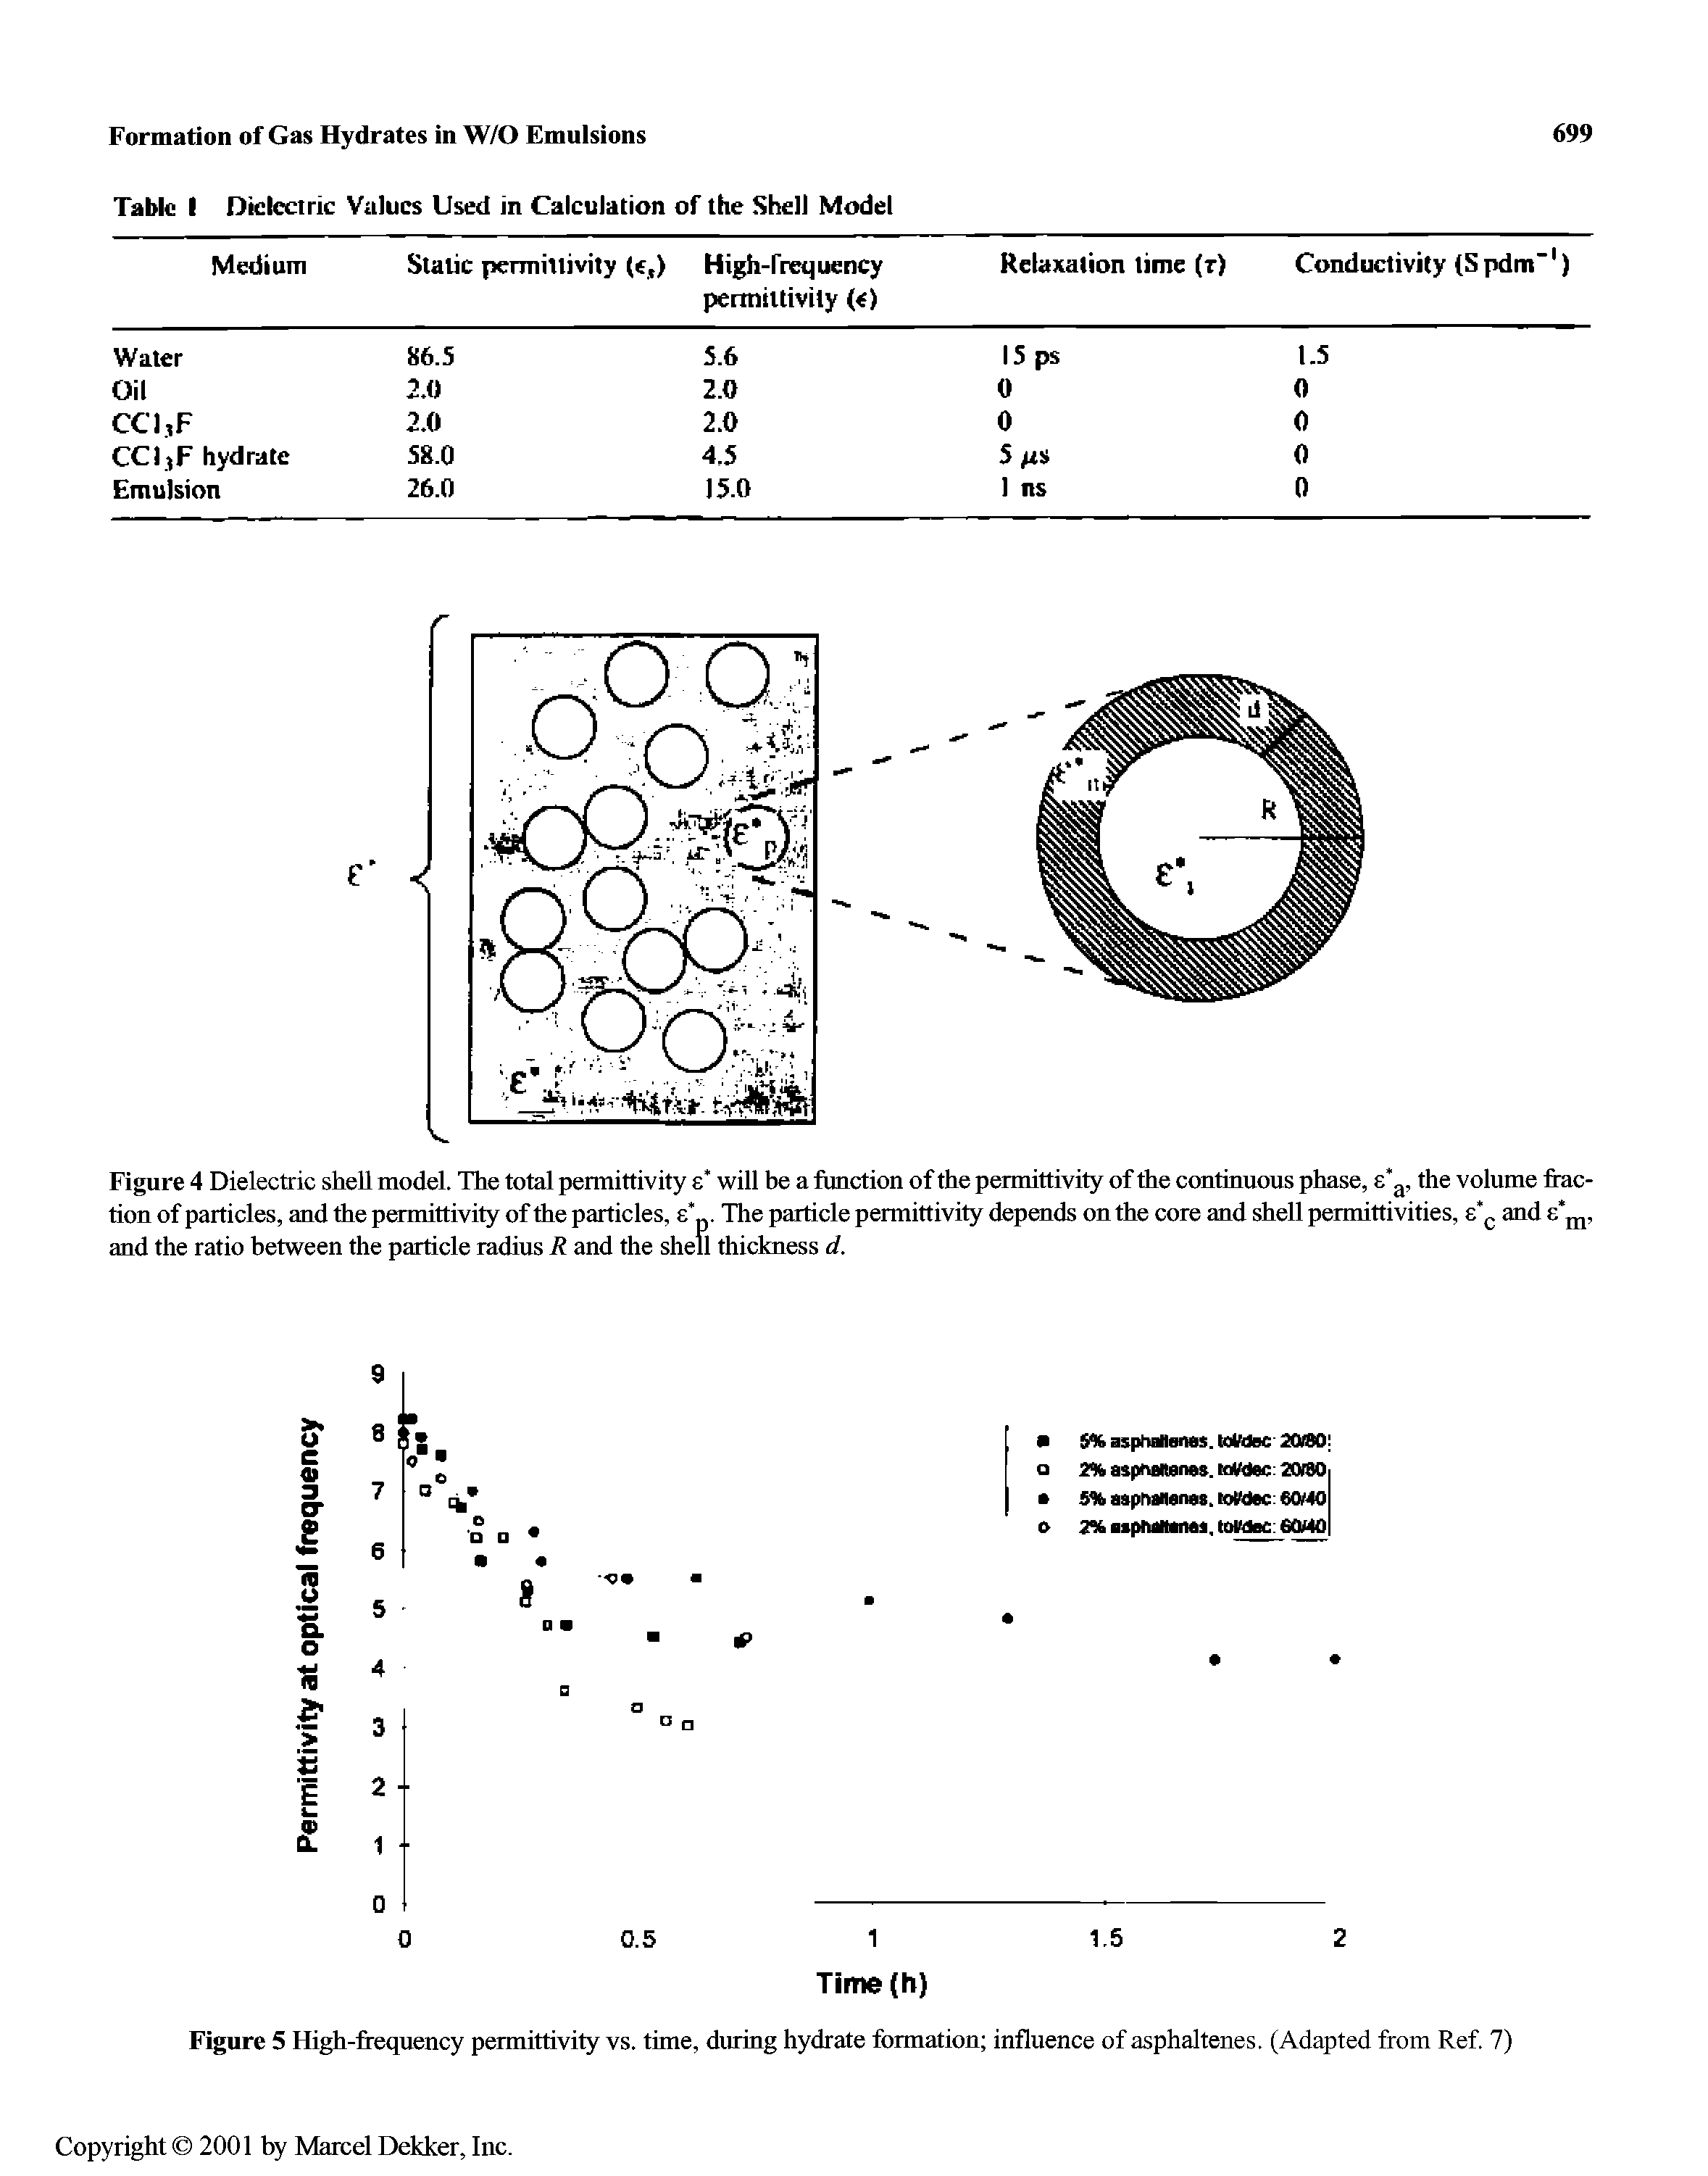 Figure 4 Dielectric shell model. The total permittivity s will be a function of the permittivity of the continuous phase, 8 g, the volume ftac-tion of particles, and the permittivity of the particles, 8 . The particle permittivity depends on the core and shell permittivities, 8 and 8 jjj, and the ratio between the particle radius R and the shell thickness d.